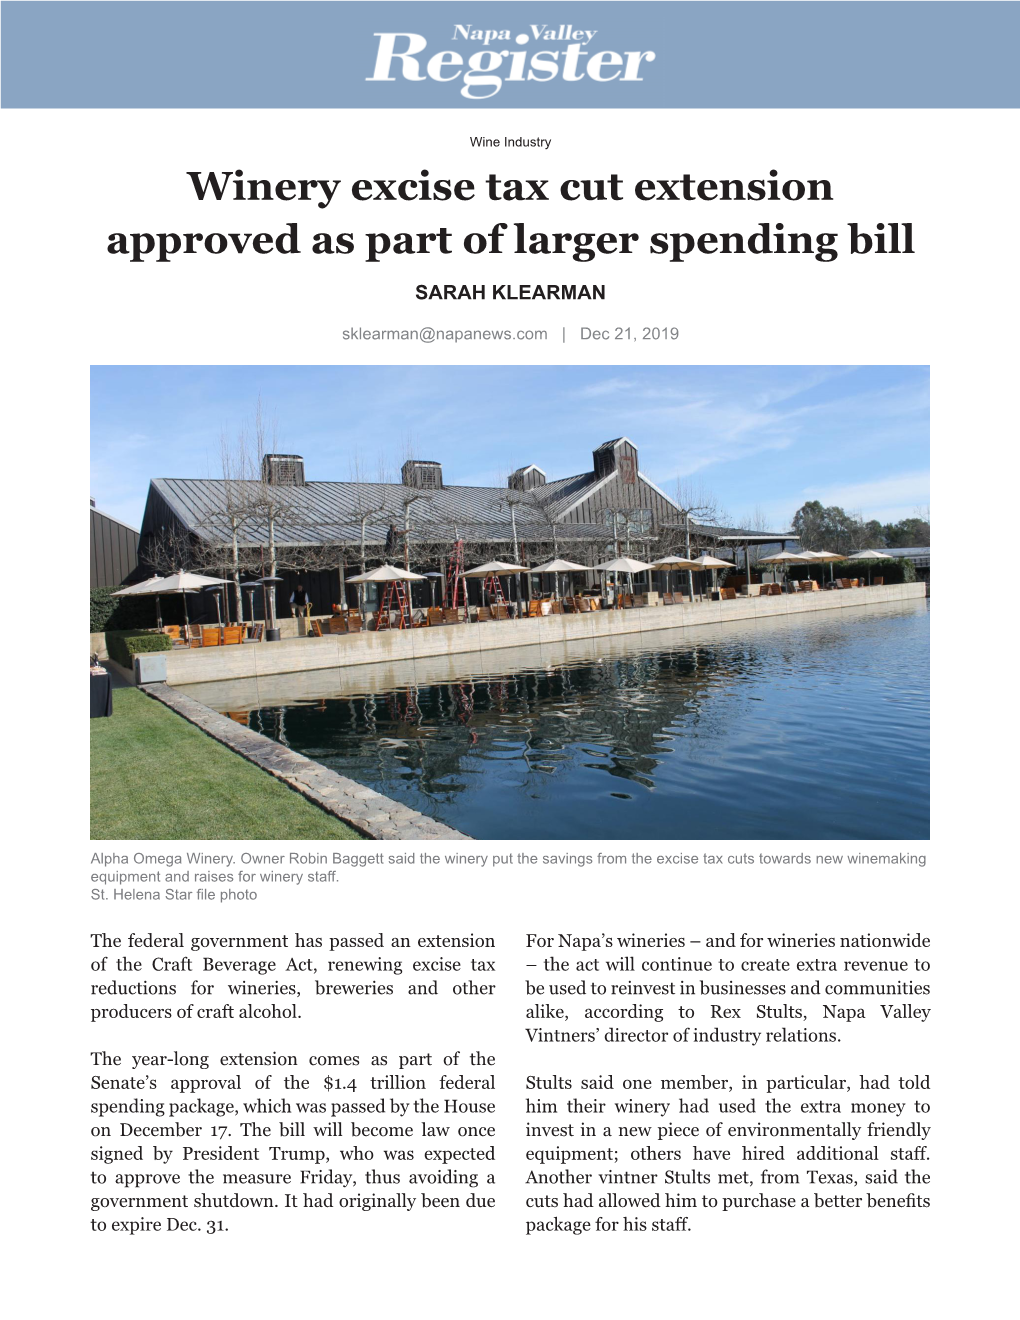 Winery Excise Tax Cut Extension Approved As Part of Larger Spending Bill